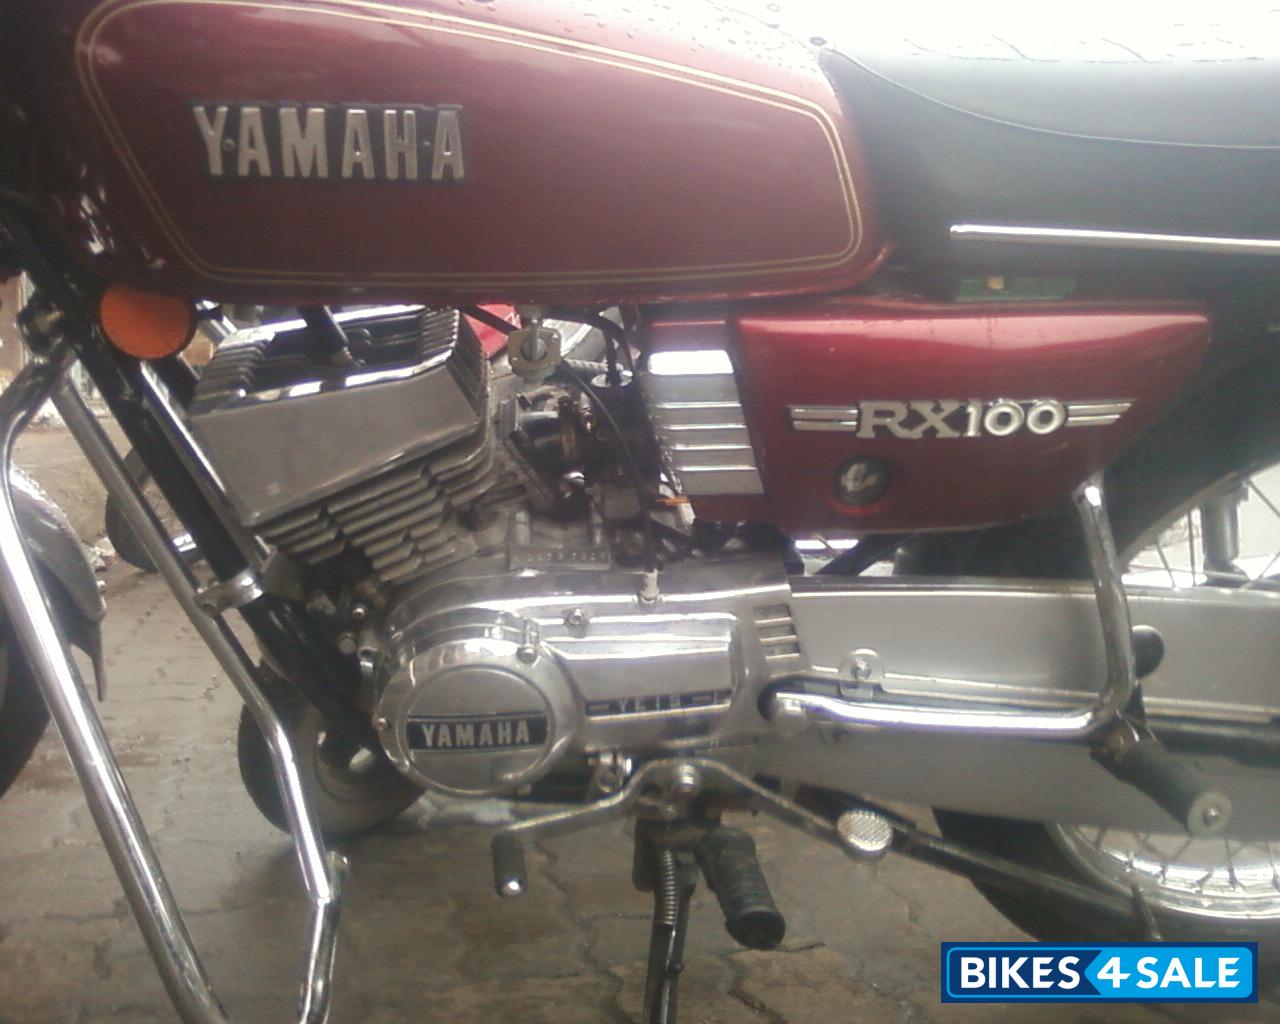 Used 1987 Model Yamaha Rx 100 For Sale In Pune Id Red Colour Bikes4sale